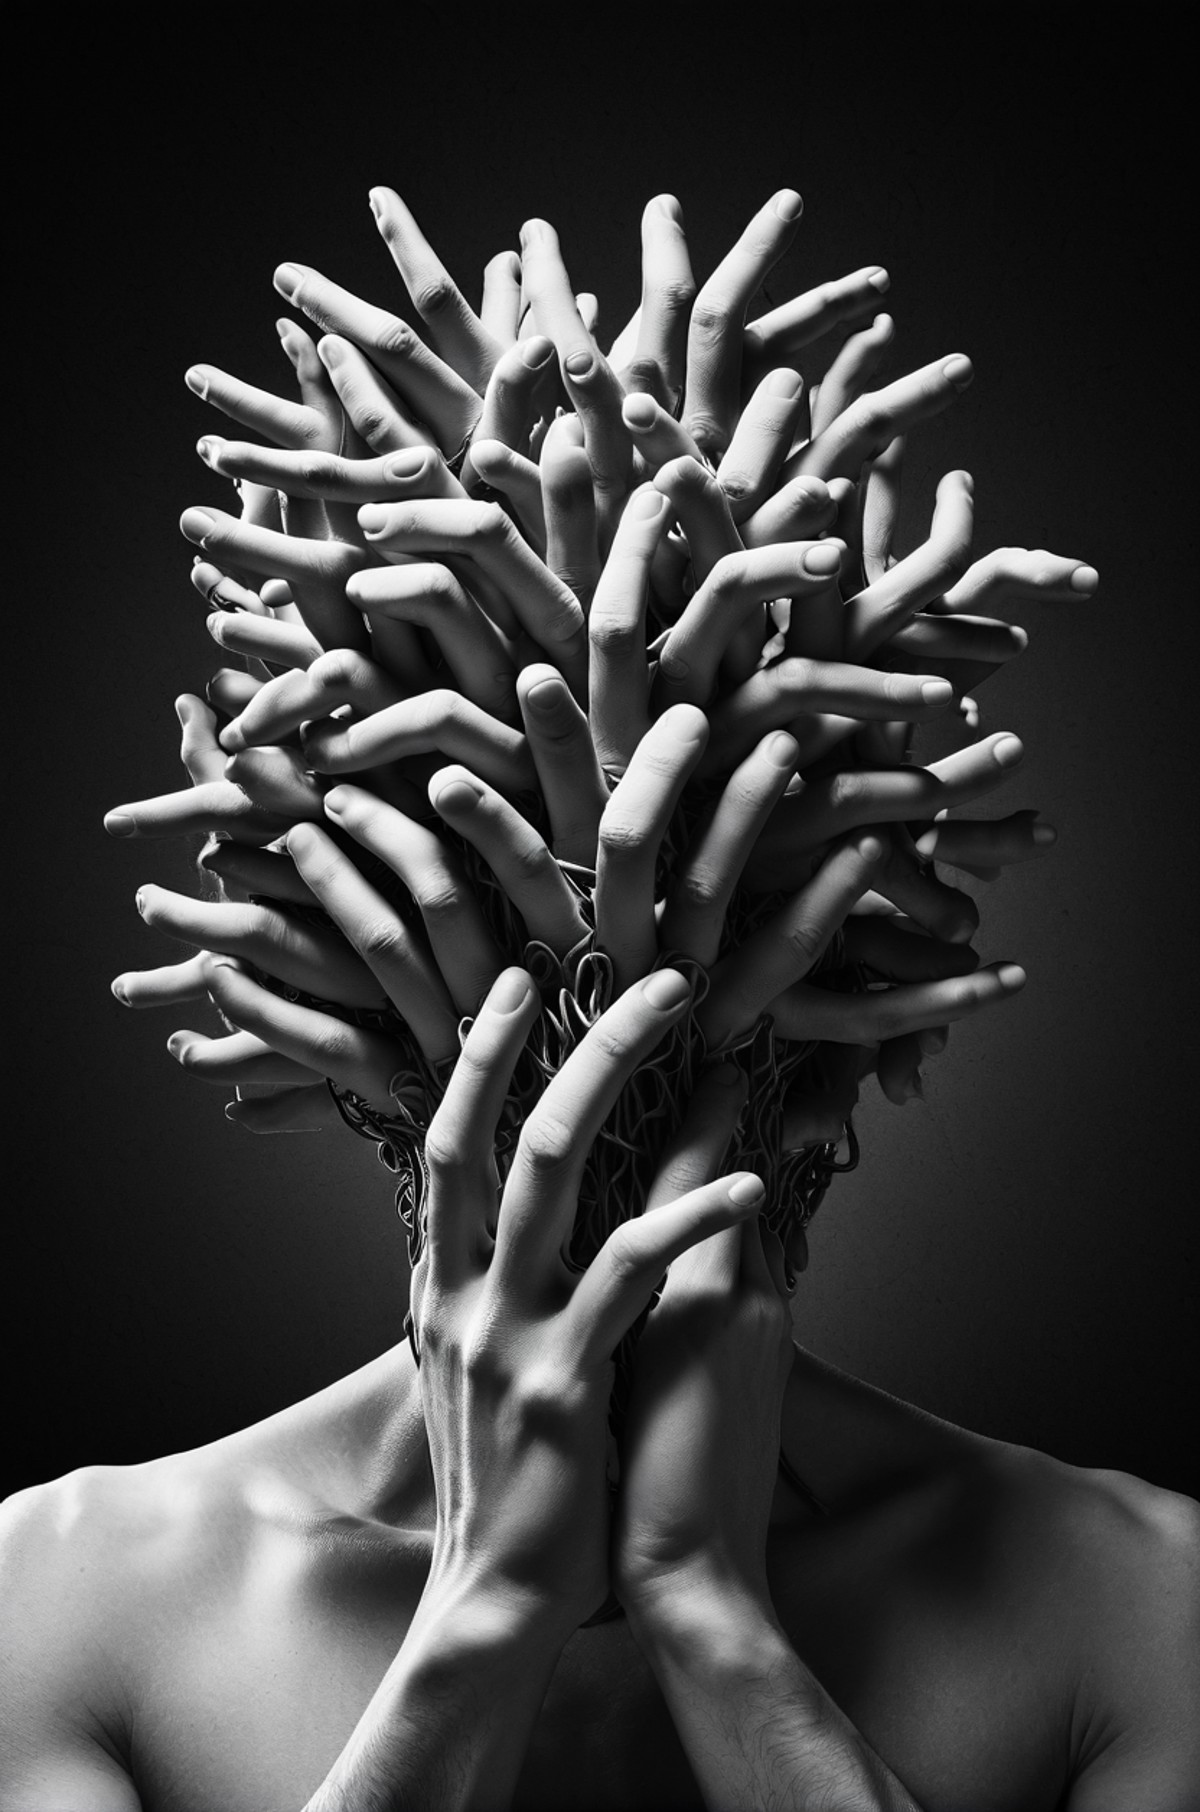 Surreal portrait, human head composed of numerous entwined fingers, rich textures evoking depth, shadowy ambiance highligh...